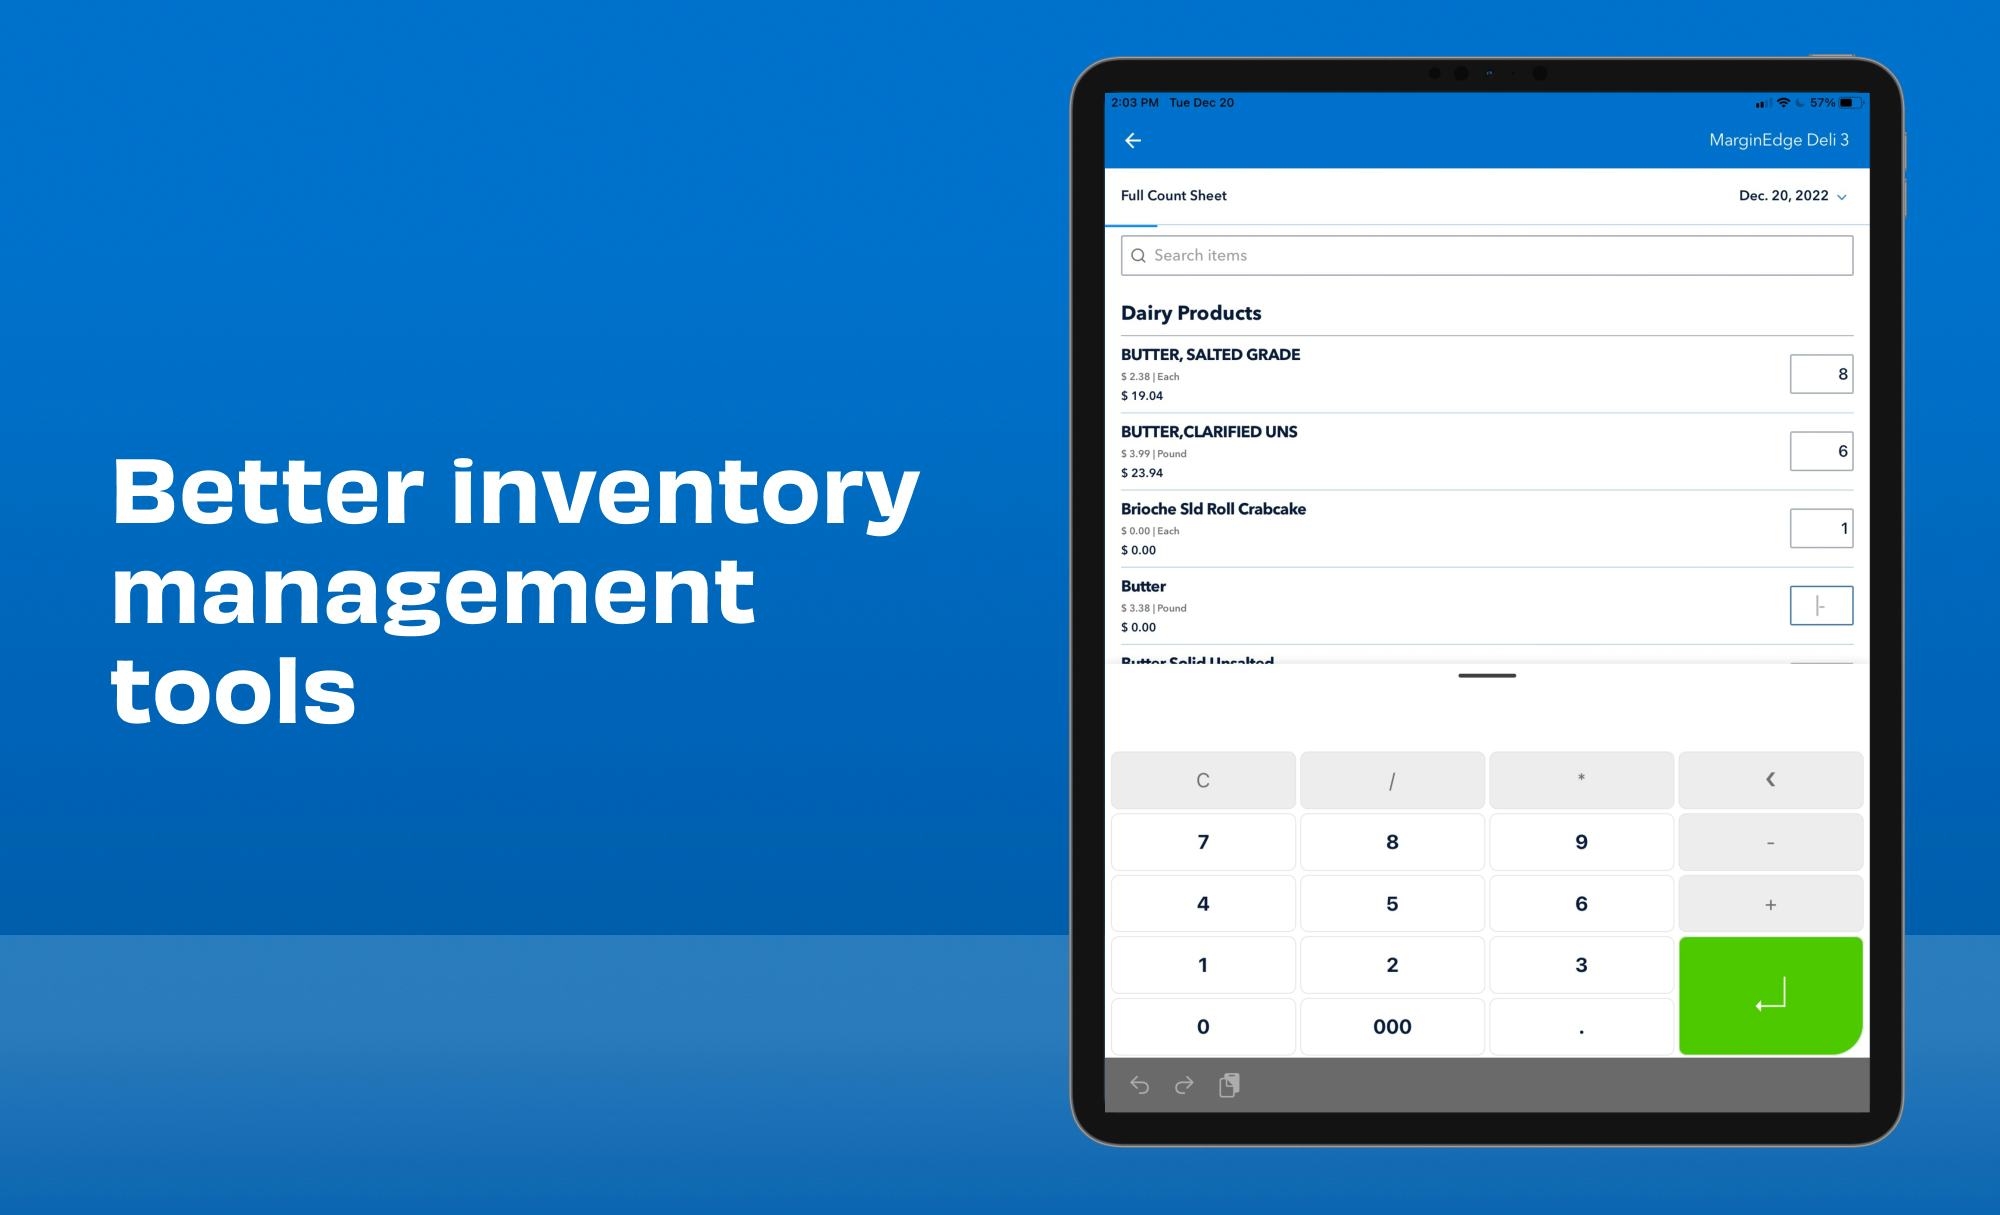 MarginEdge Software - MarginEdge makes taking inventory easier, faster, and more informative. We process invoices in 24-48 hours, so product prices are automatically updated and new products are already on inventory count sheets. You can kiss manual spreadsheets goodbye!